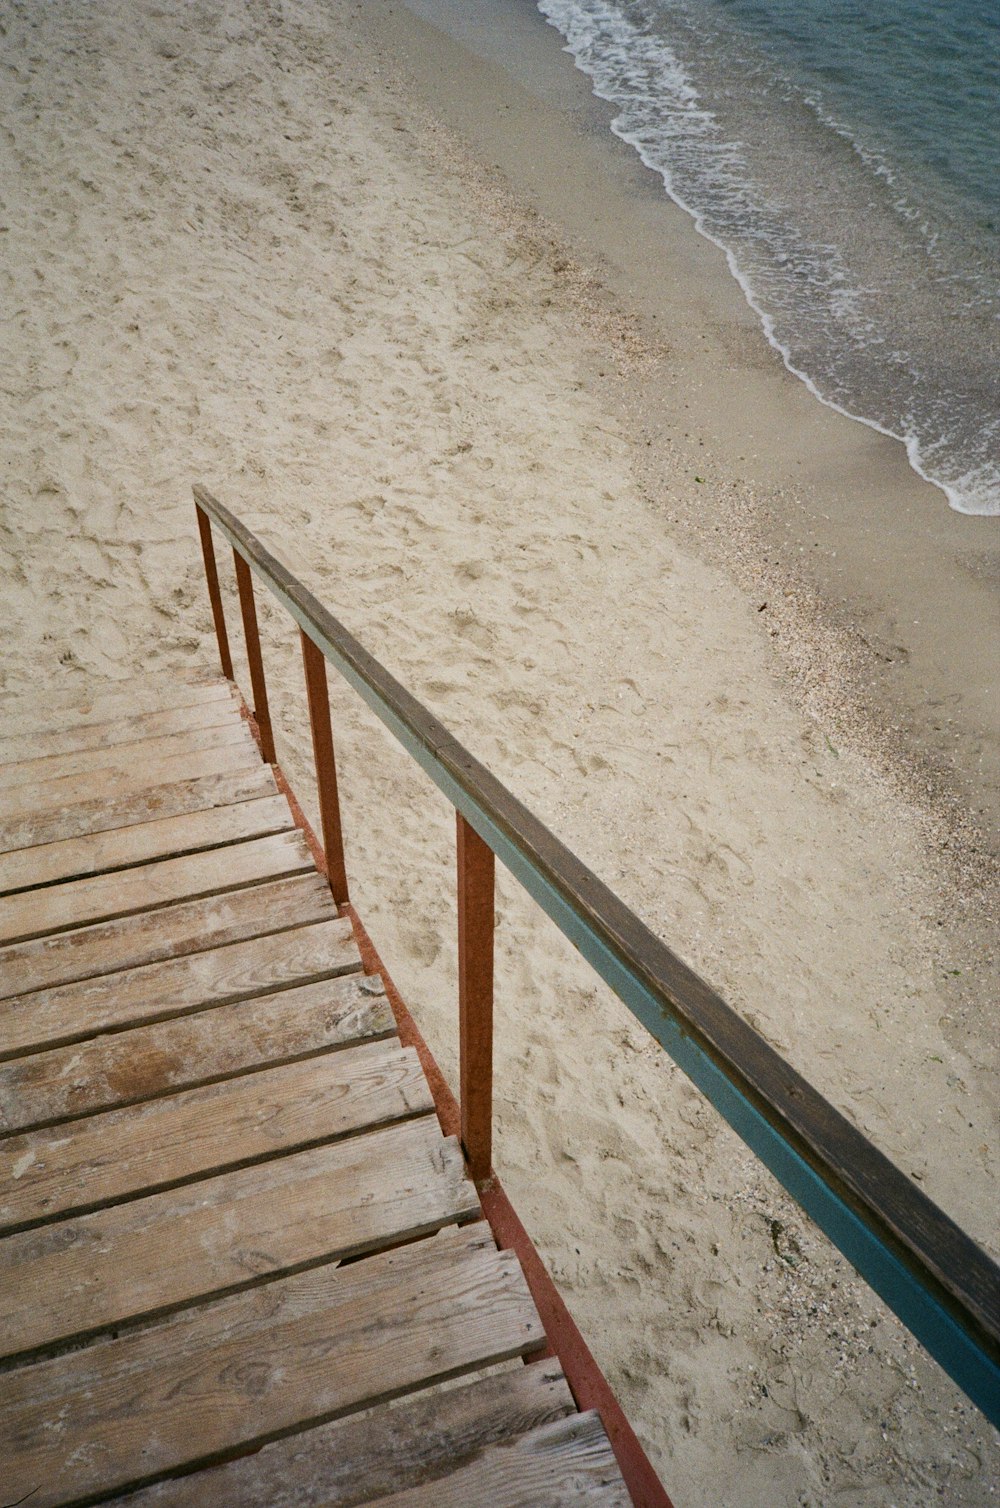 a view of a beach from a wooden walkway